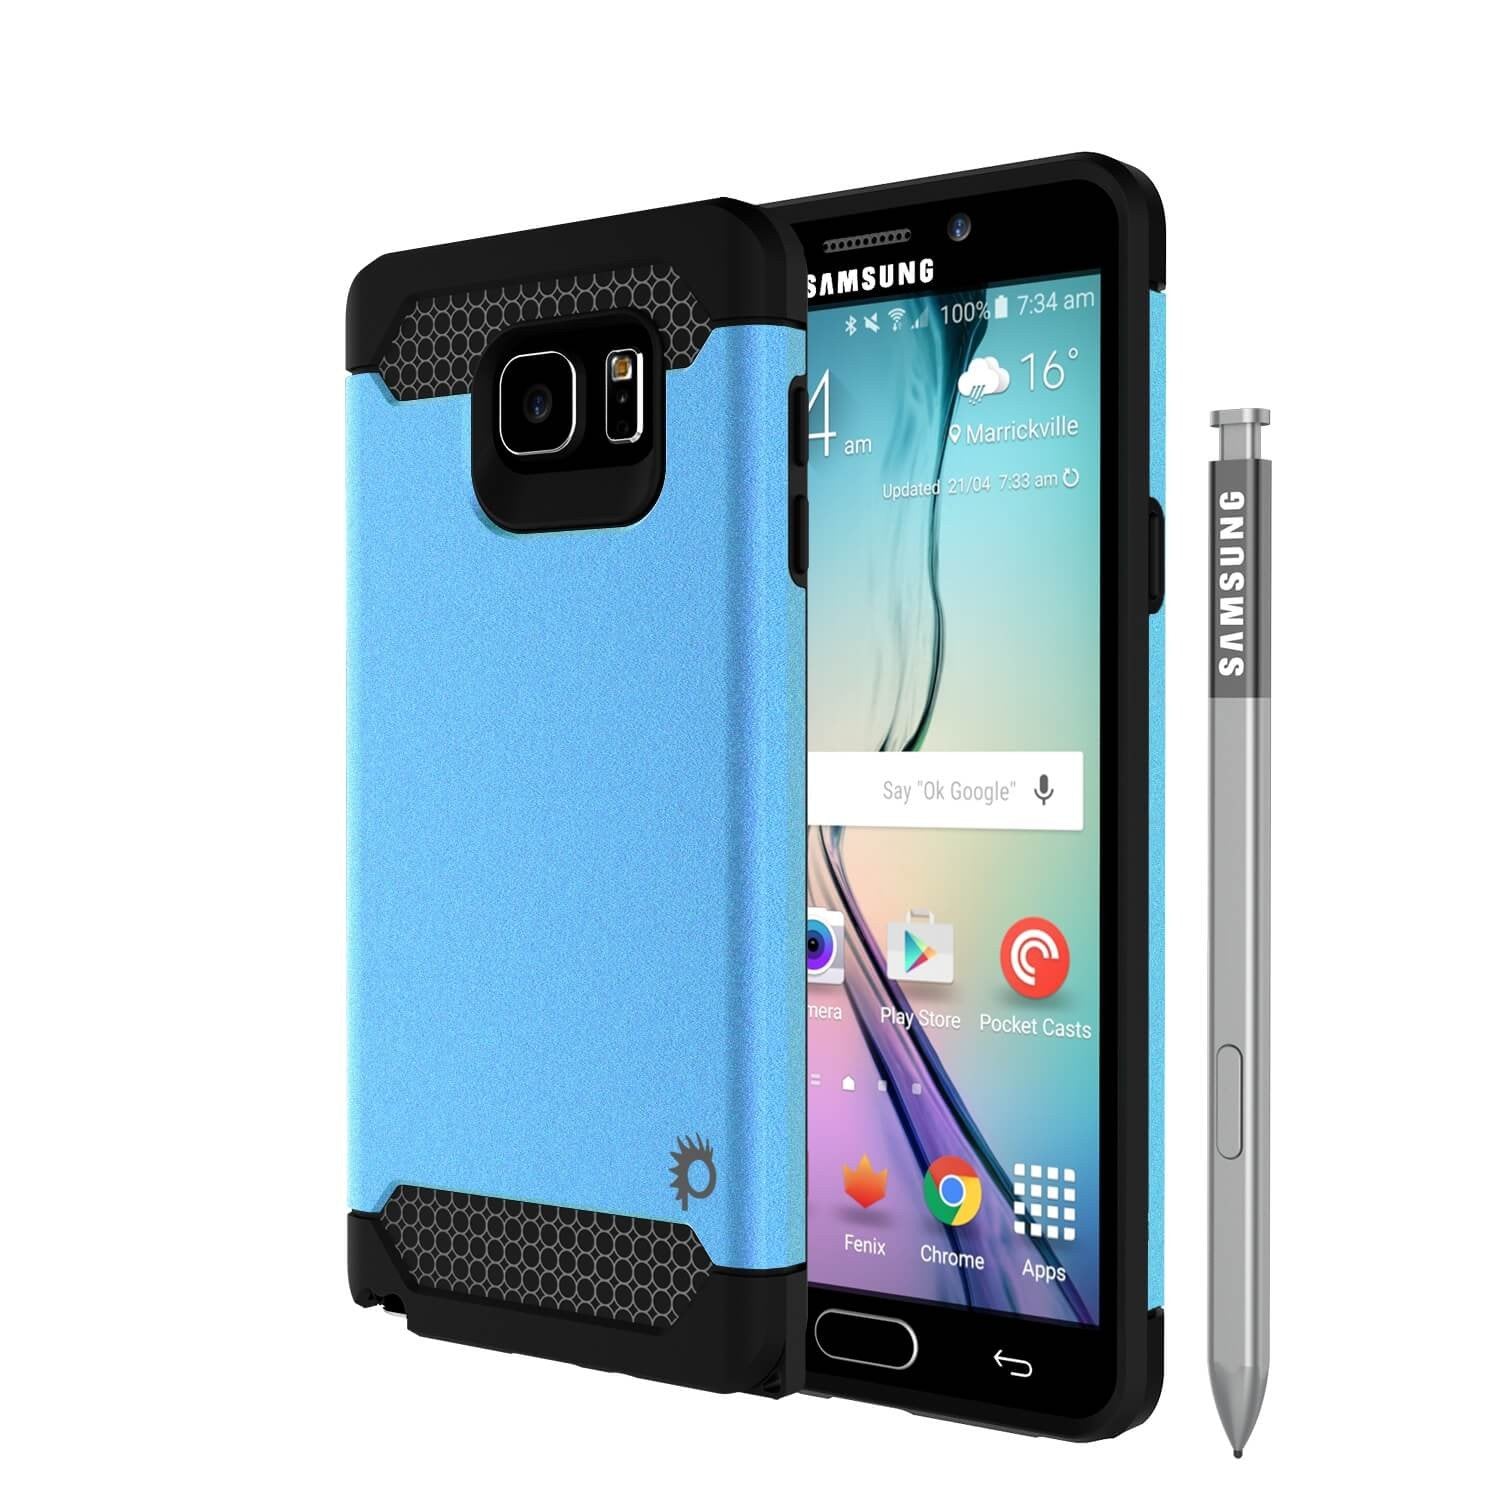 Galaxy Note 5 Case PunkCase Galactic Teal Series Slim Armor Soft Cover Case w/ Tempered Glass